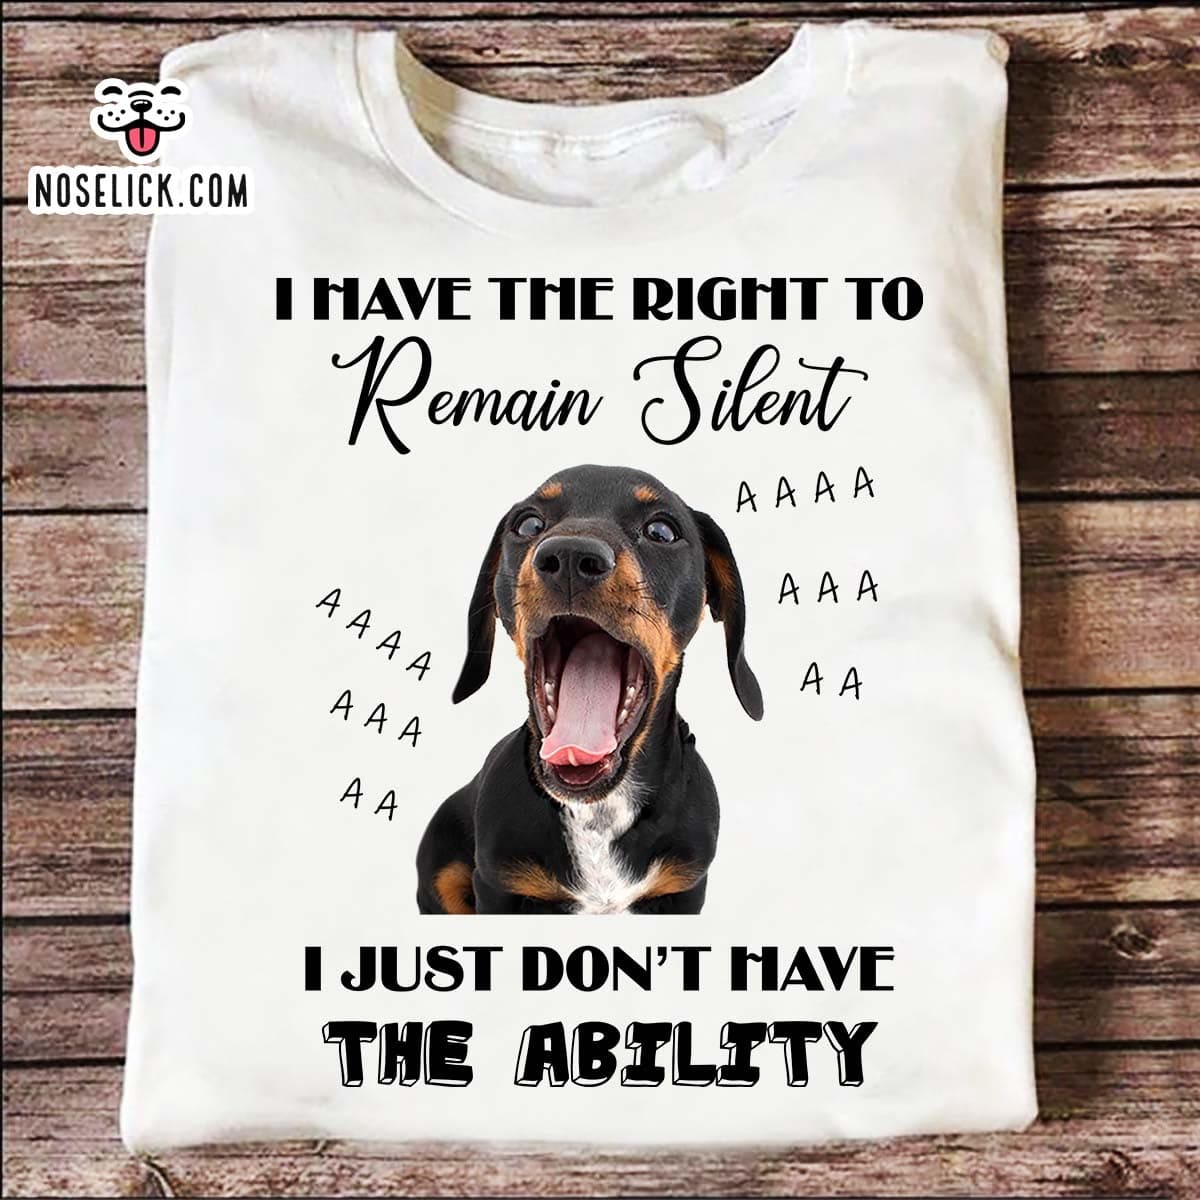 I have the right to remain silent I just don't have he ability - Dachshund dog T-shirt